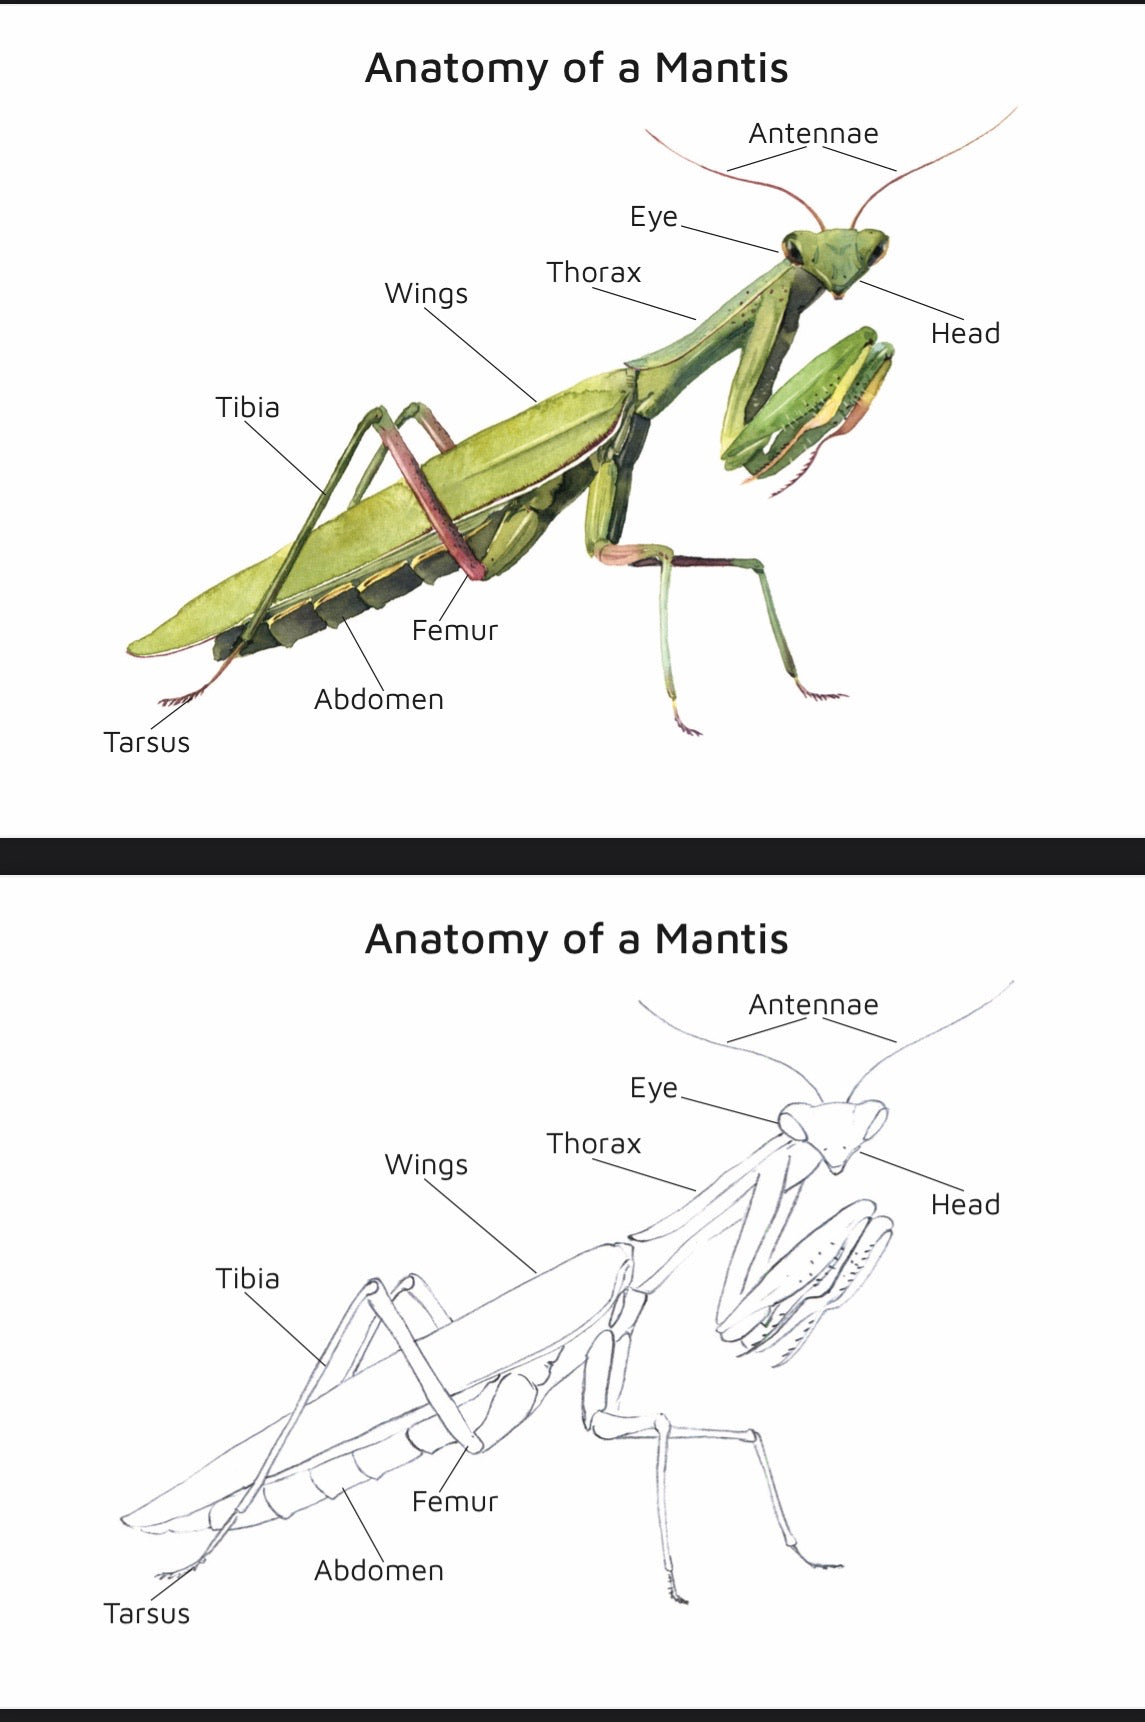 Cicada, Mantis, Spider, and Snail Anatomy (PDF only)